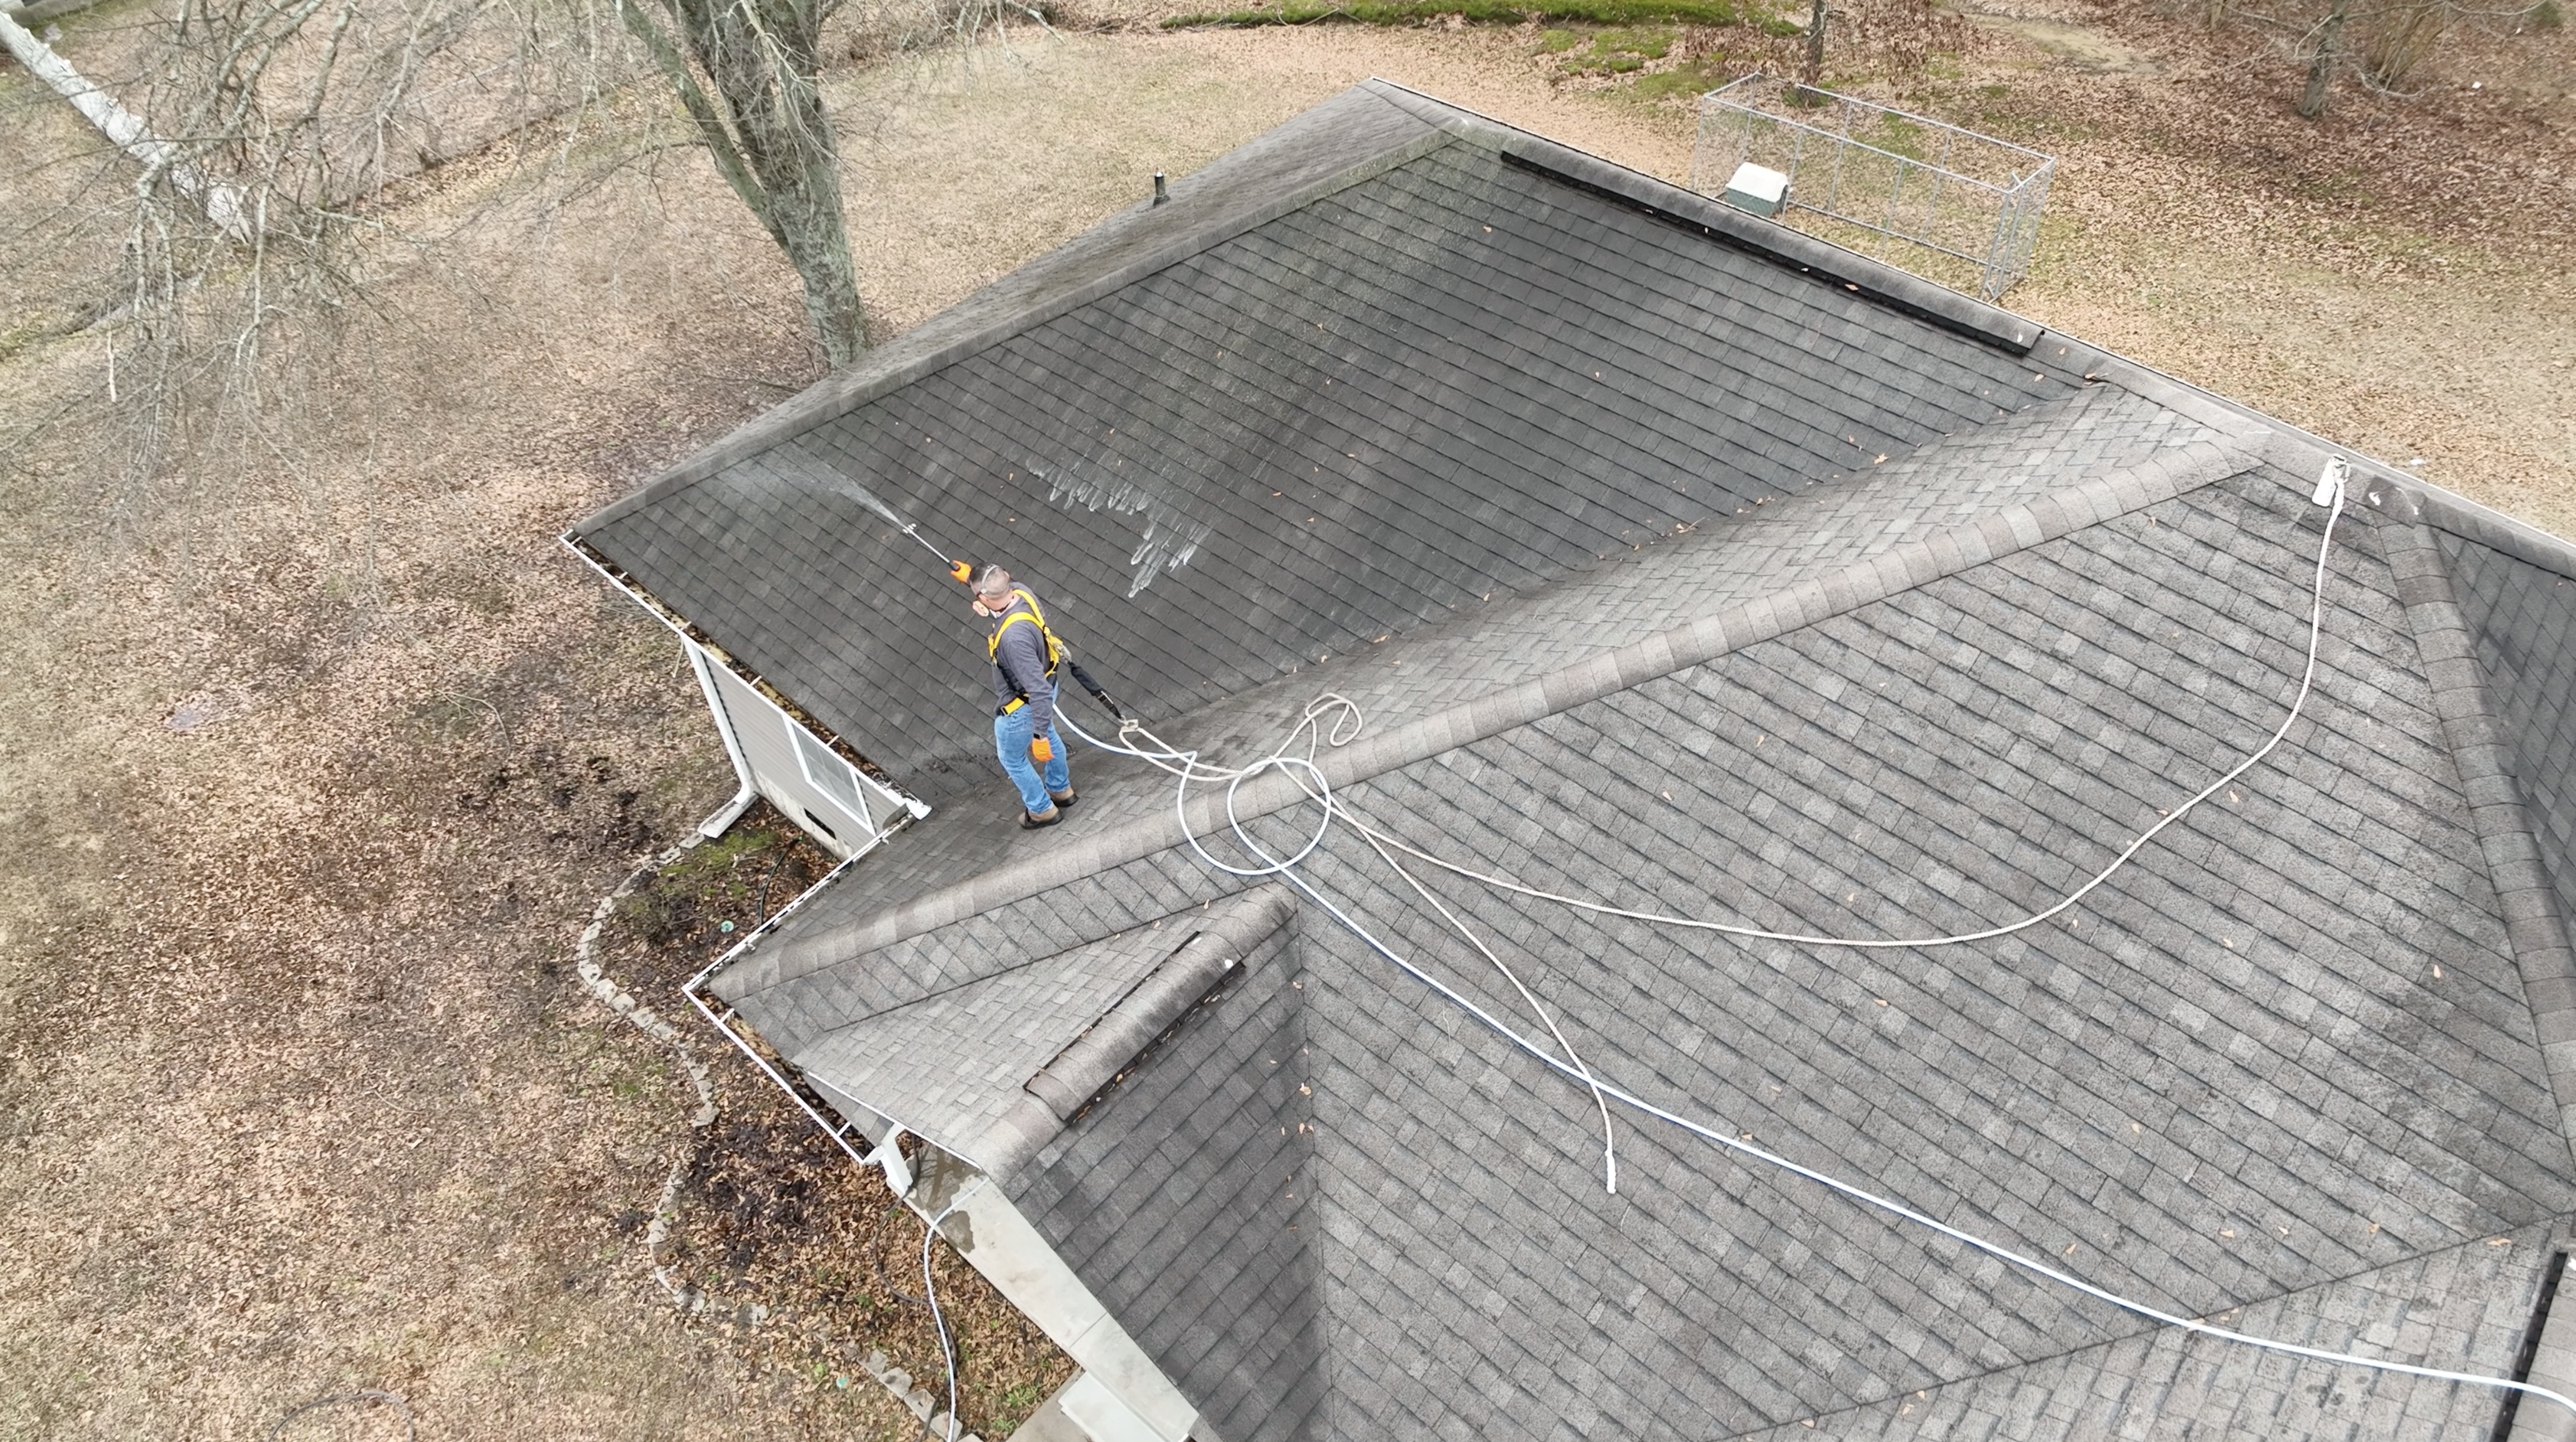 Certified Roof Shield Applicator soft washing a roof before restoring it with Roof Reboot by Roof Shield.